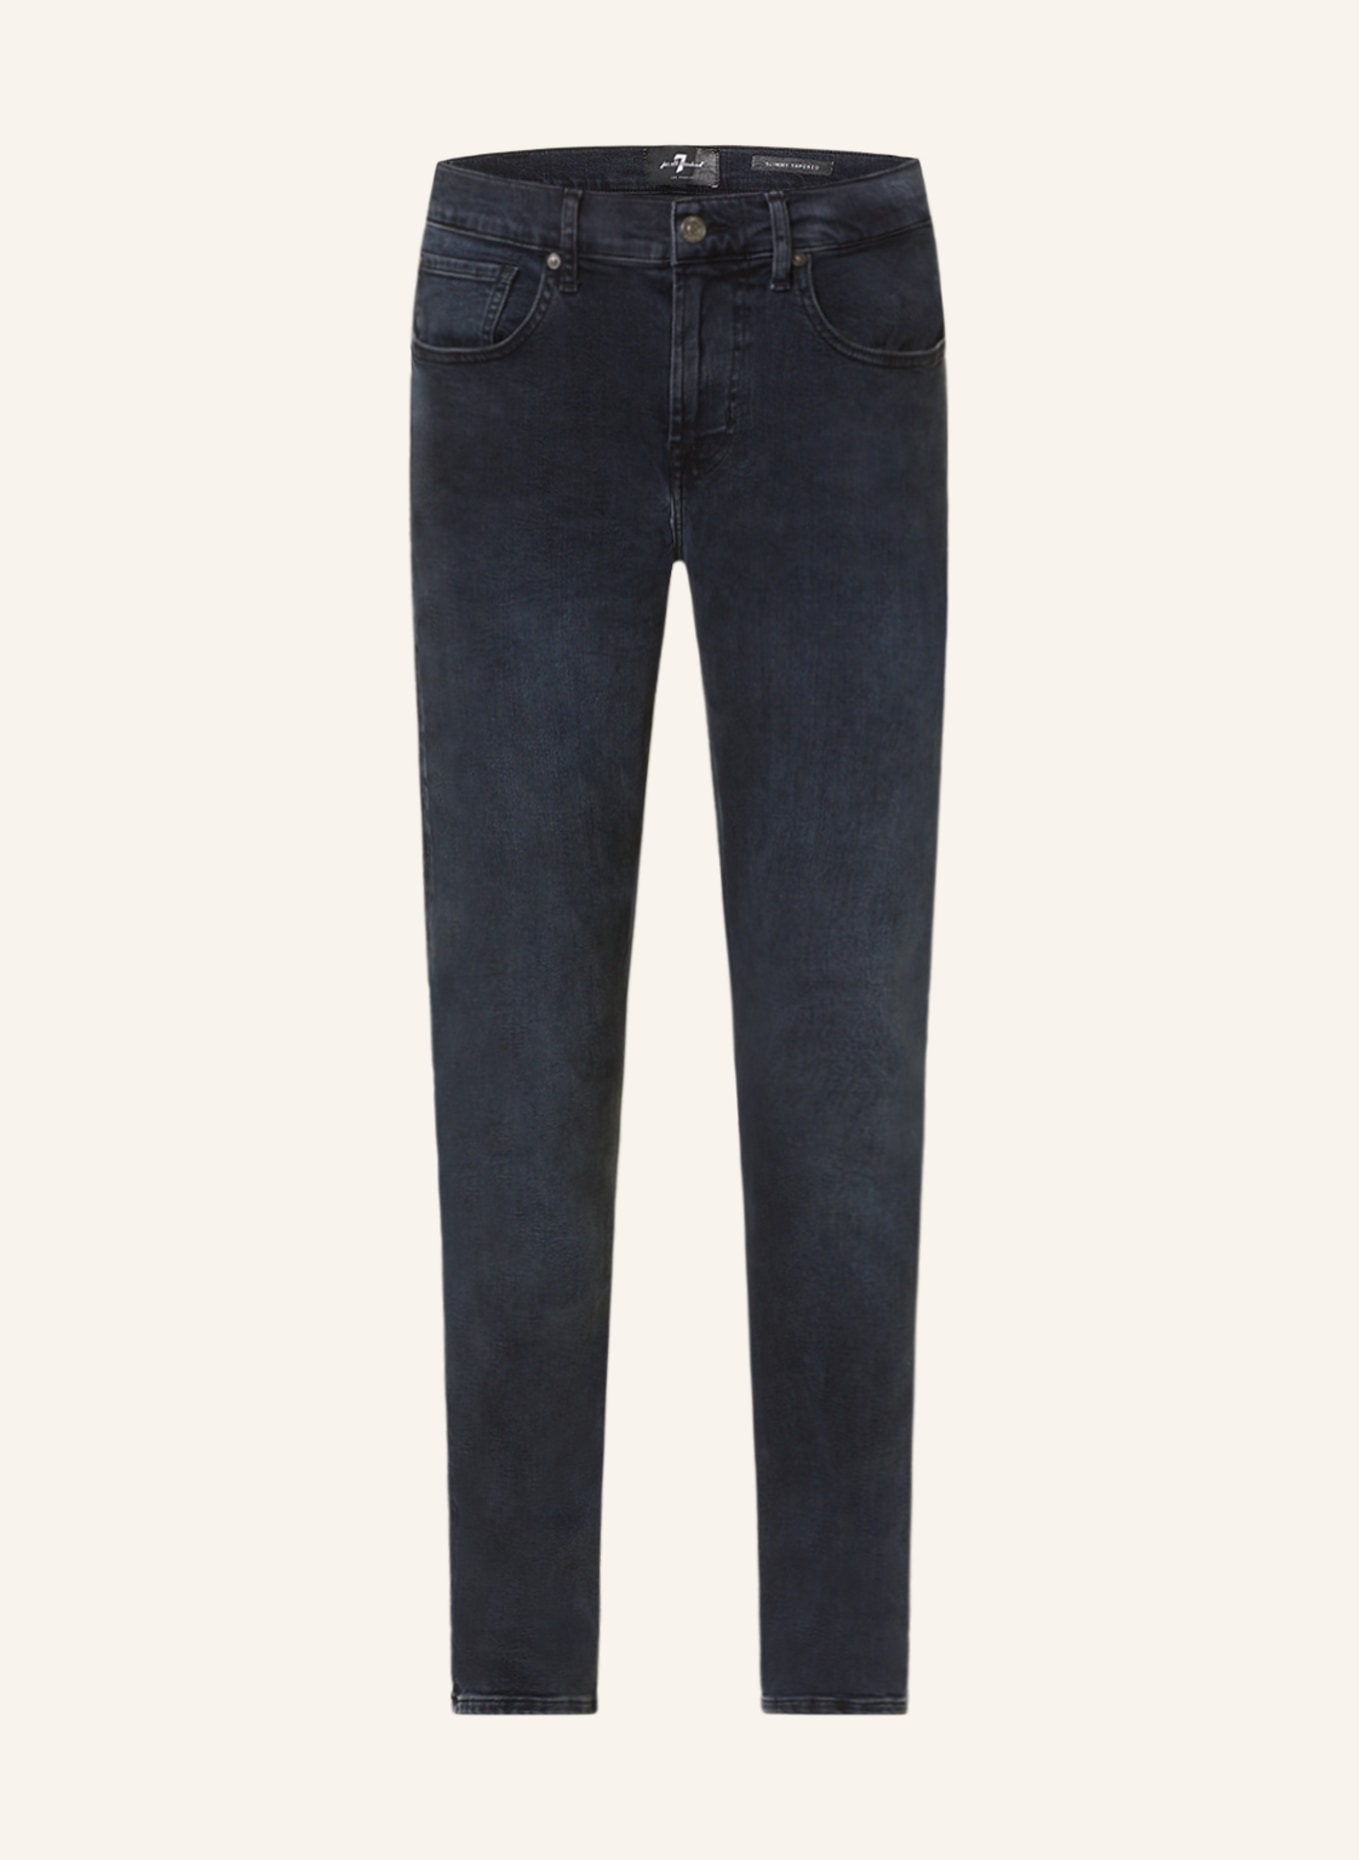 7 for all mankind Jeans Slimmy Tapered Fit, Farbe: DARK BLUE (Bild 1)